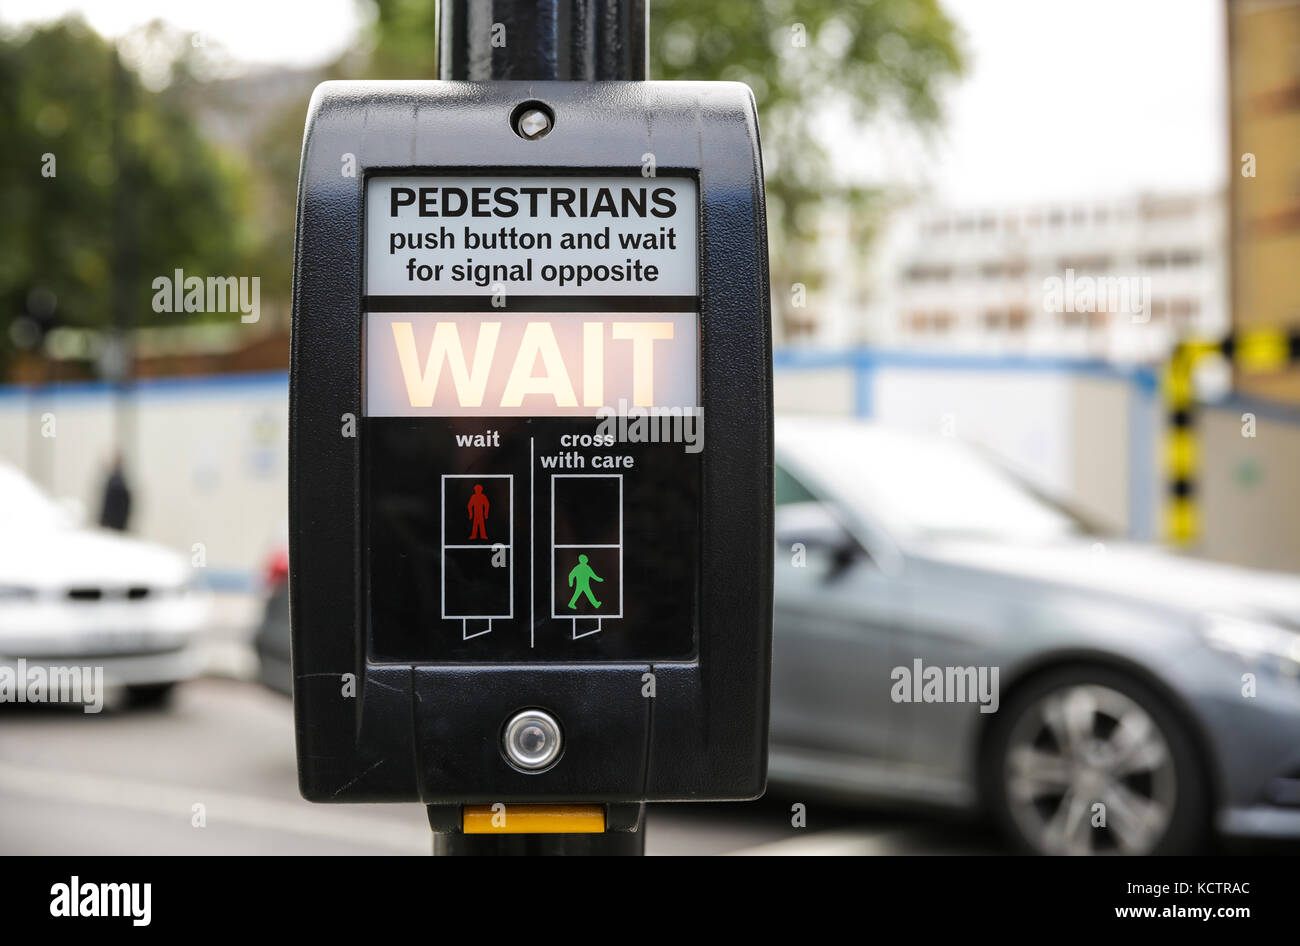 A pedestrian crossing point in London with cars in the background Stock Photo